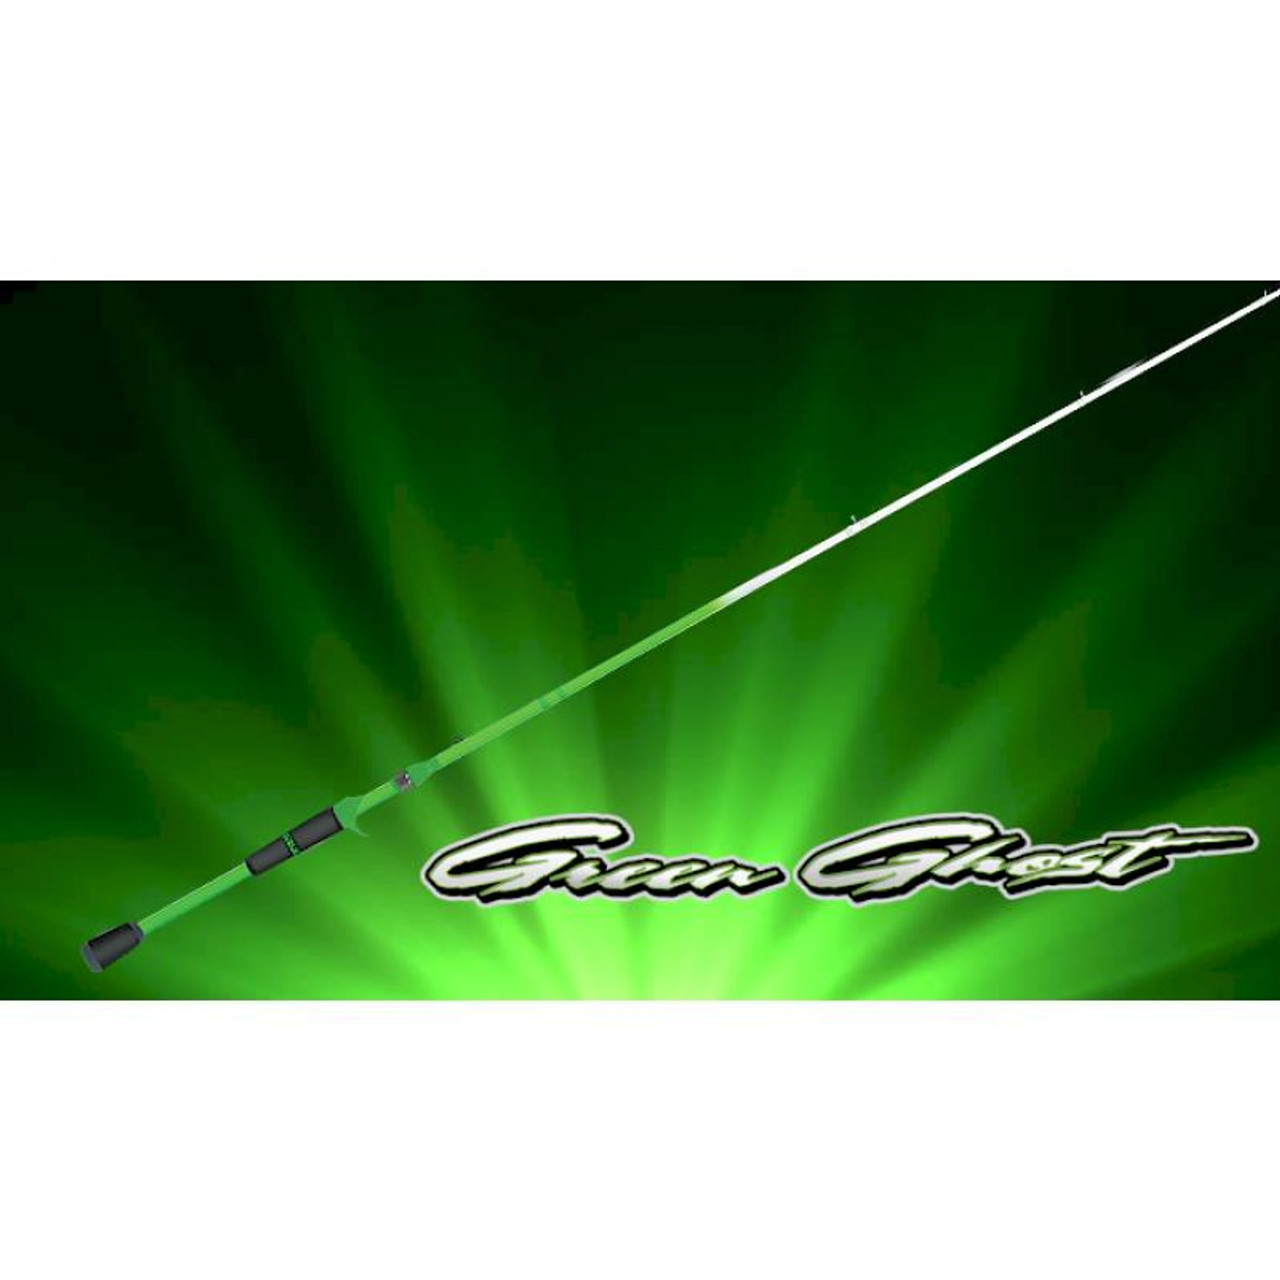 https://cdn11.bigcommerce.com/s-70mih4s/images/stencil/1280x1280/products/18108/45325/Duckett-Fishing-Green-Ghost-Spinning-Rod-859940006388_image1__17936.1577756045.jpg?c=2